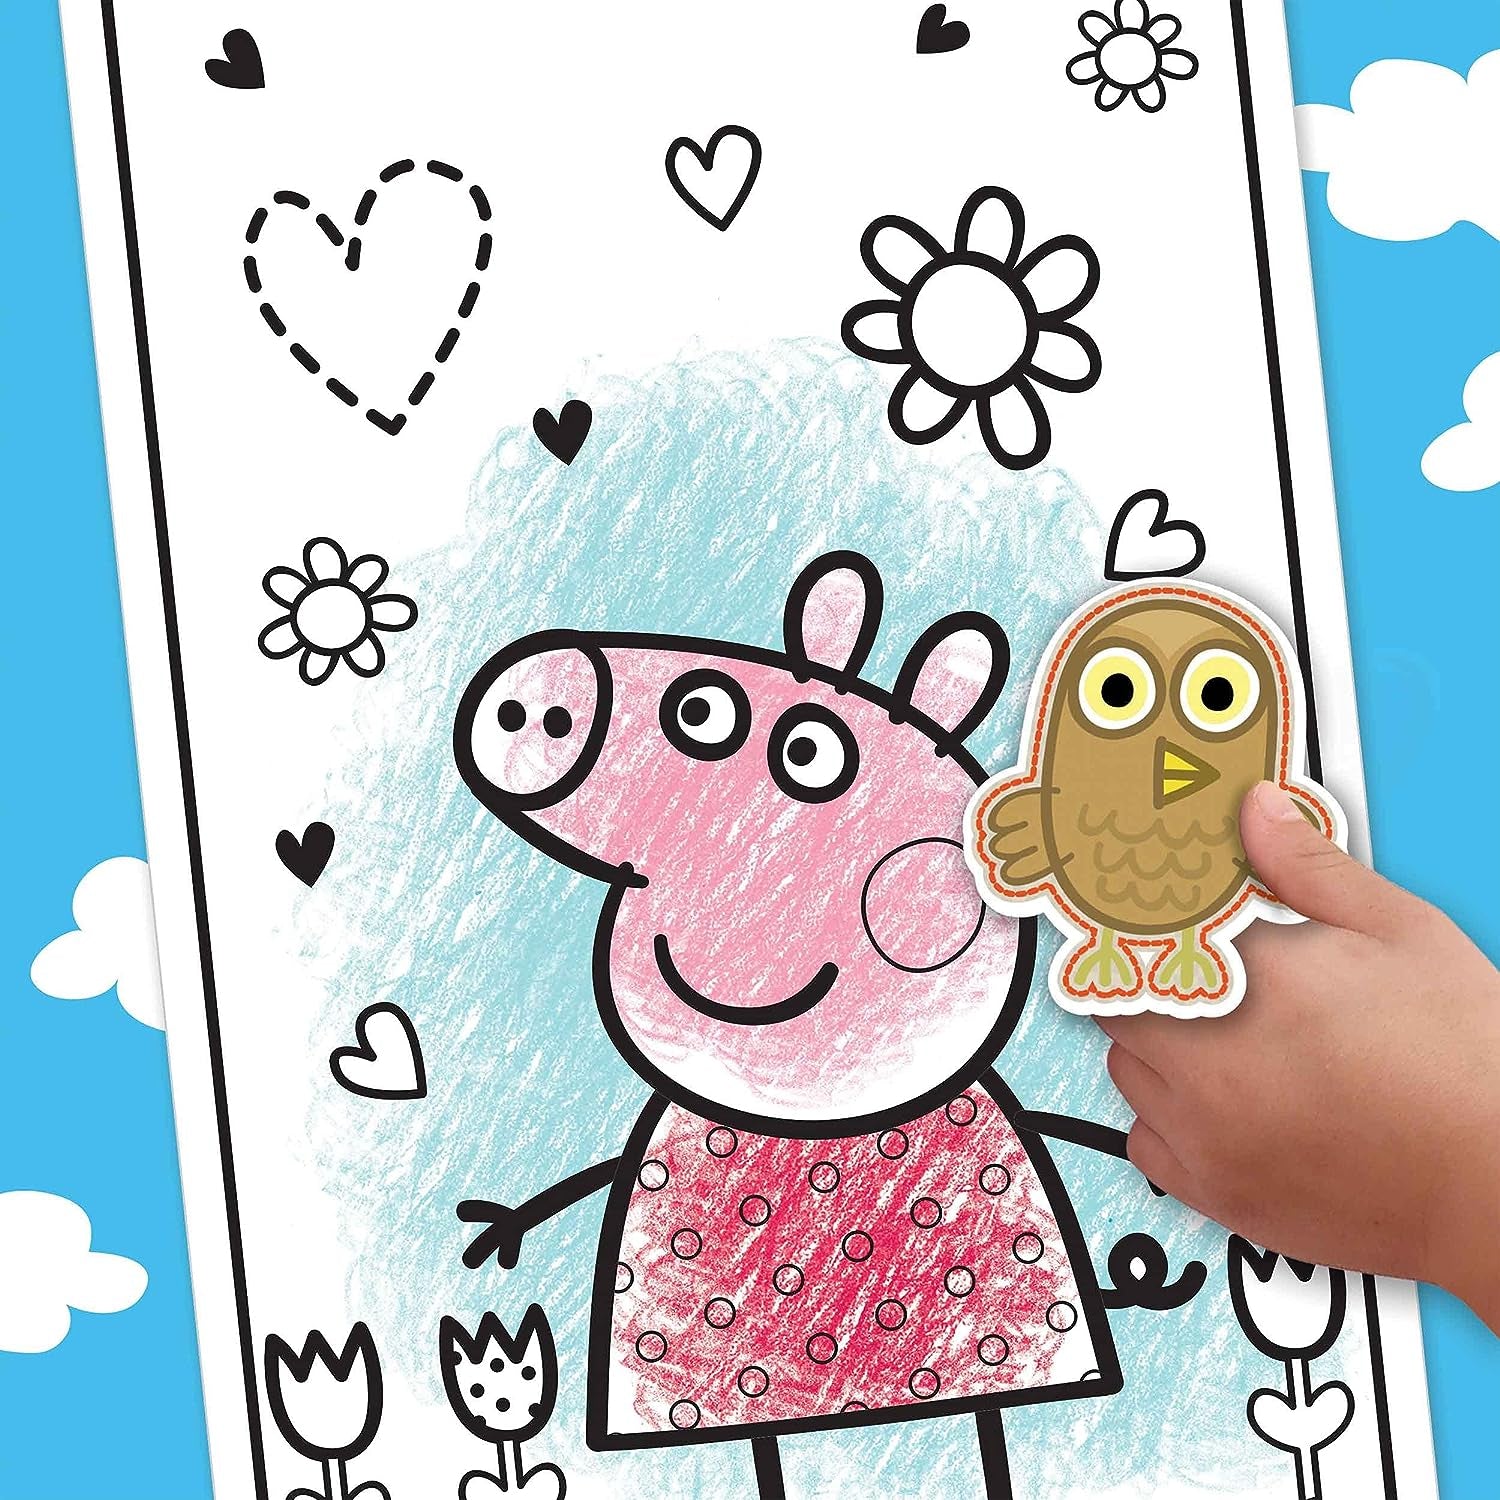 DRAWING AND COLORING PEPPA PIG DADDY PIG GEORGE AND MUMMY PIG 